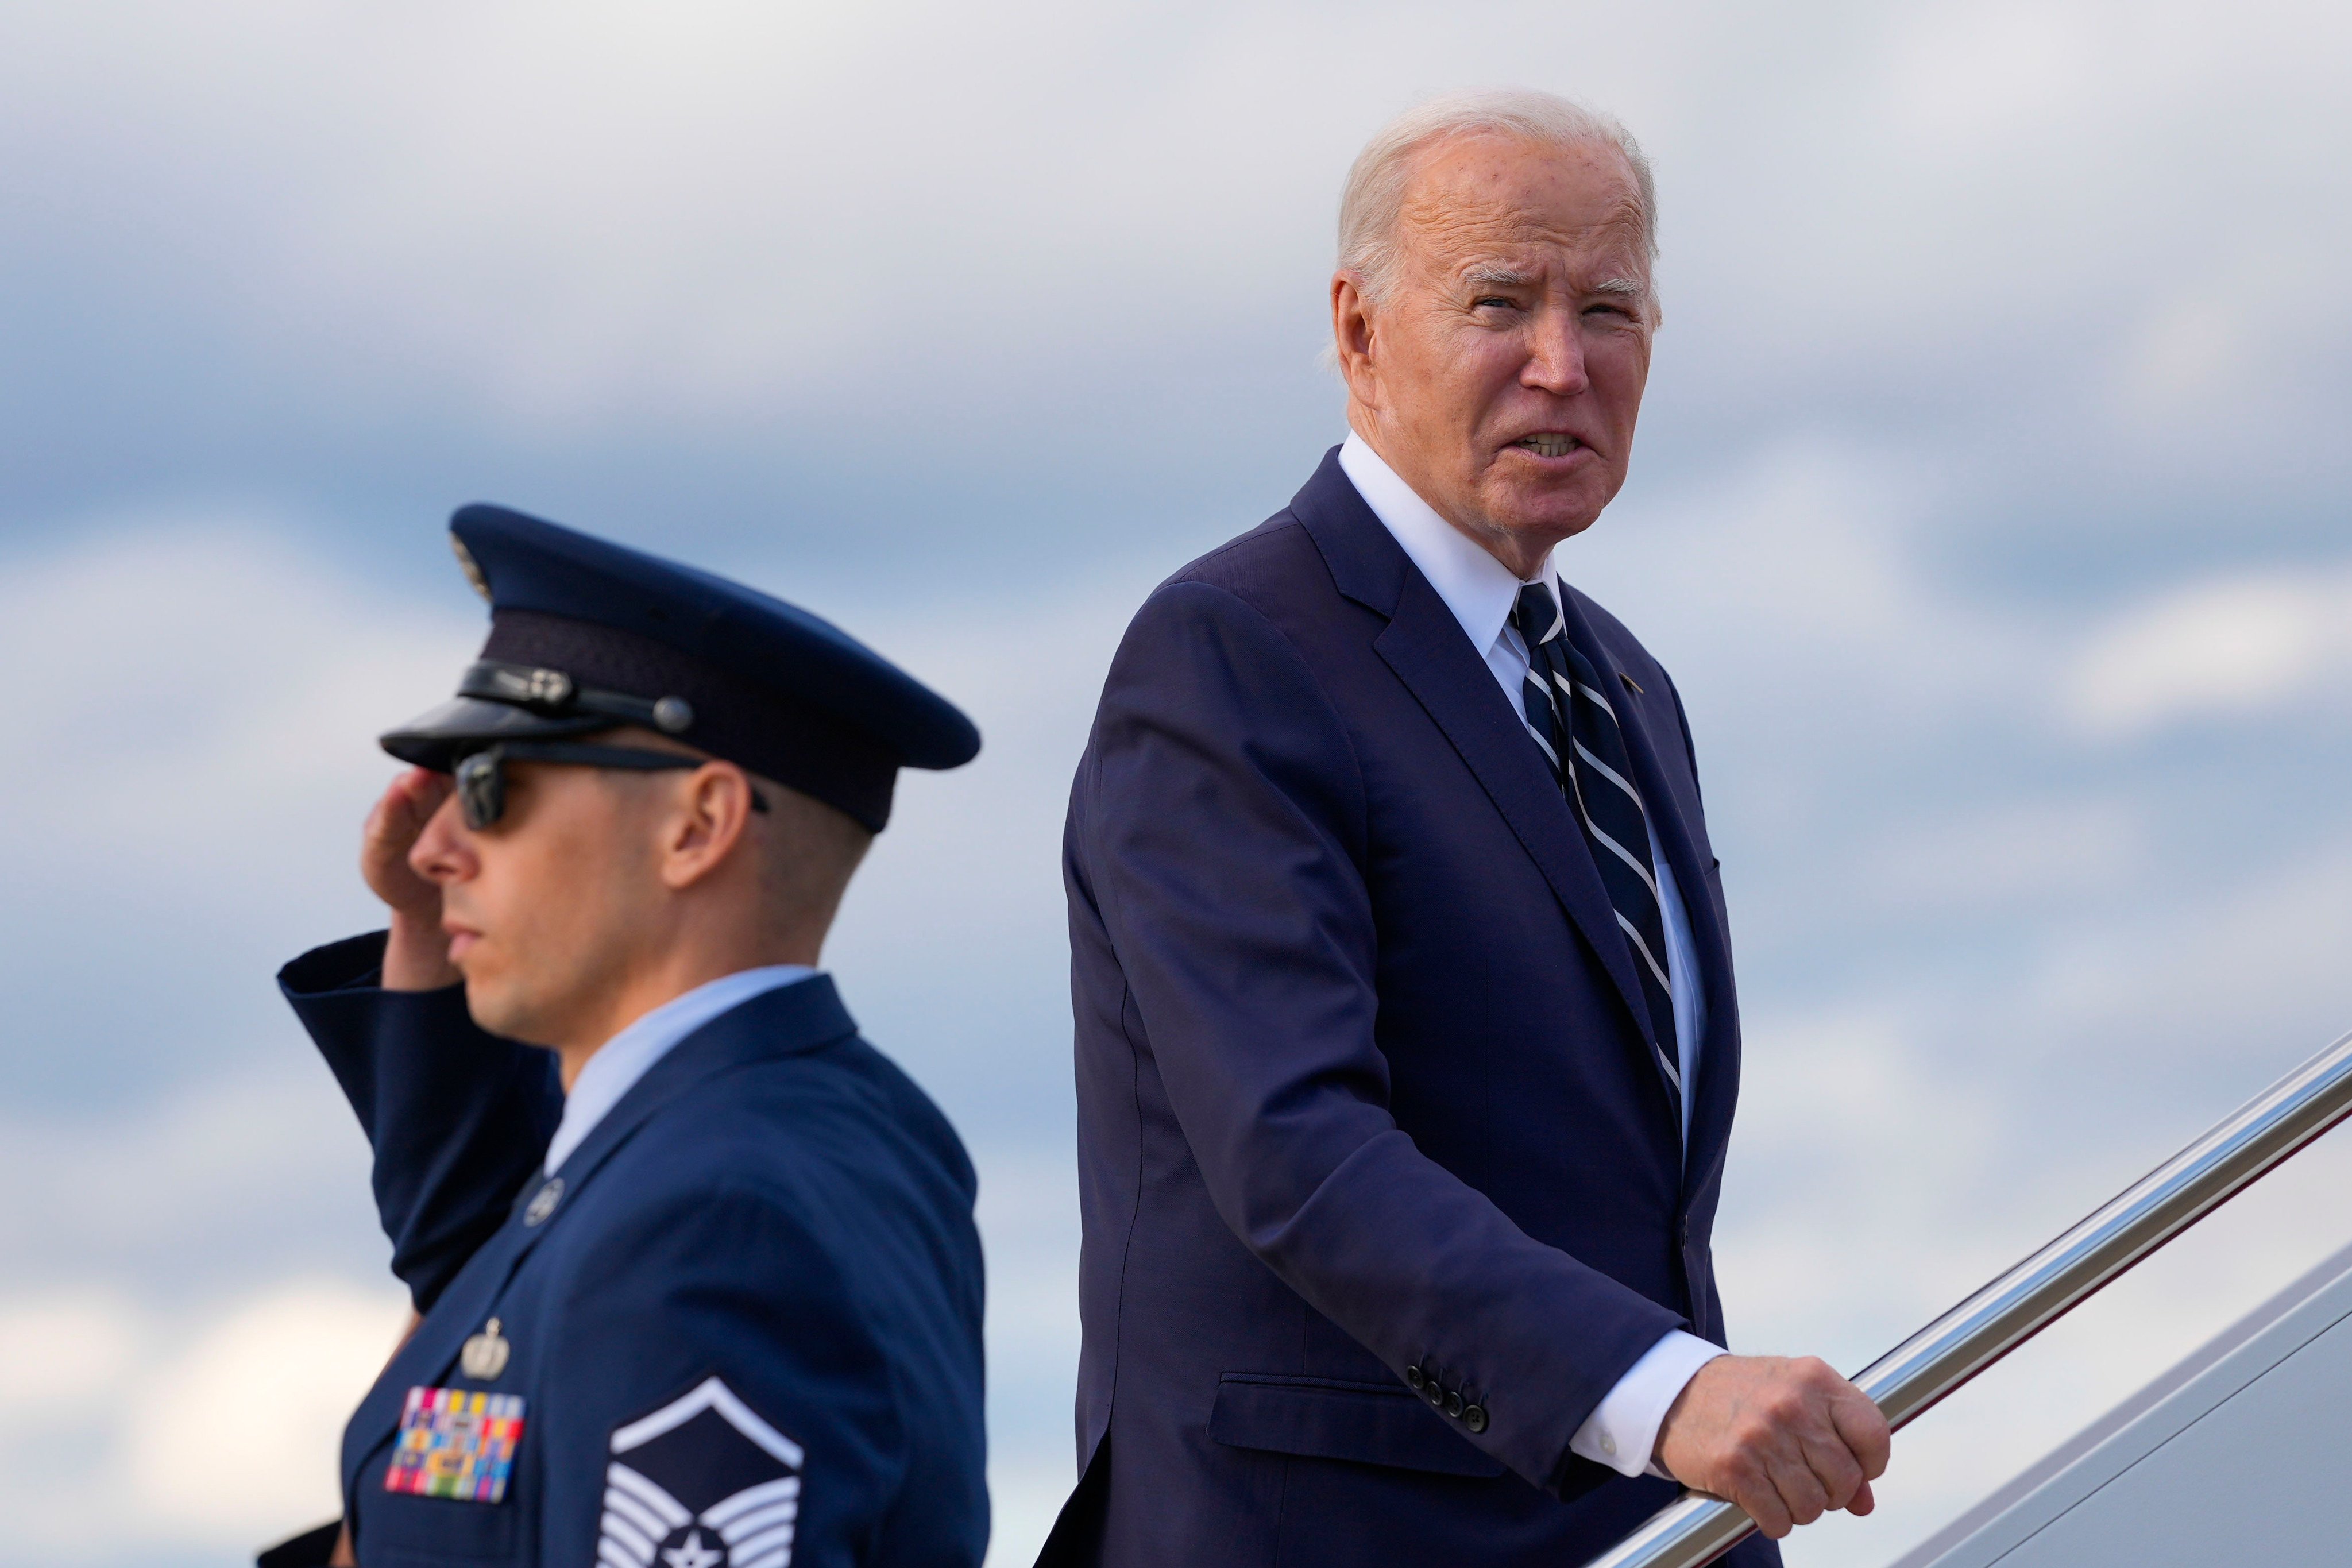 US President Joe Biden boards Air Force One at Andrews Air Force Base in Maryland on Friday. Photo: AP